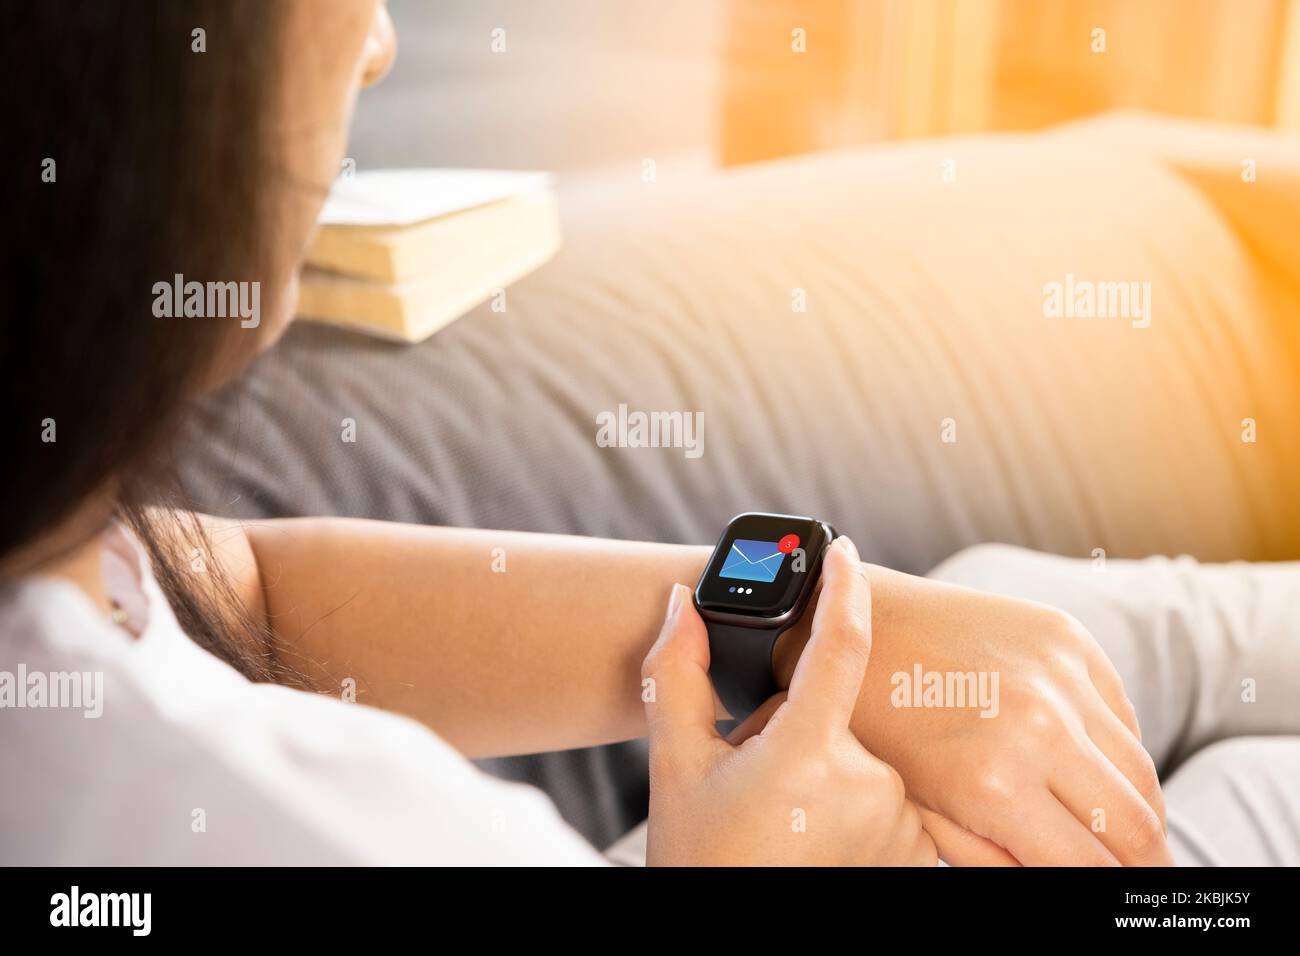 Unread email icon on smartwatch screen. Over shoulder view of woman touching her wearable technology, checking messages. Relaxing on the couch. Stock Photo